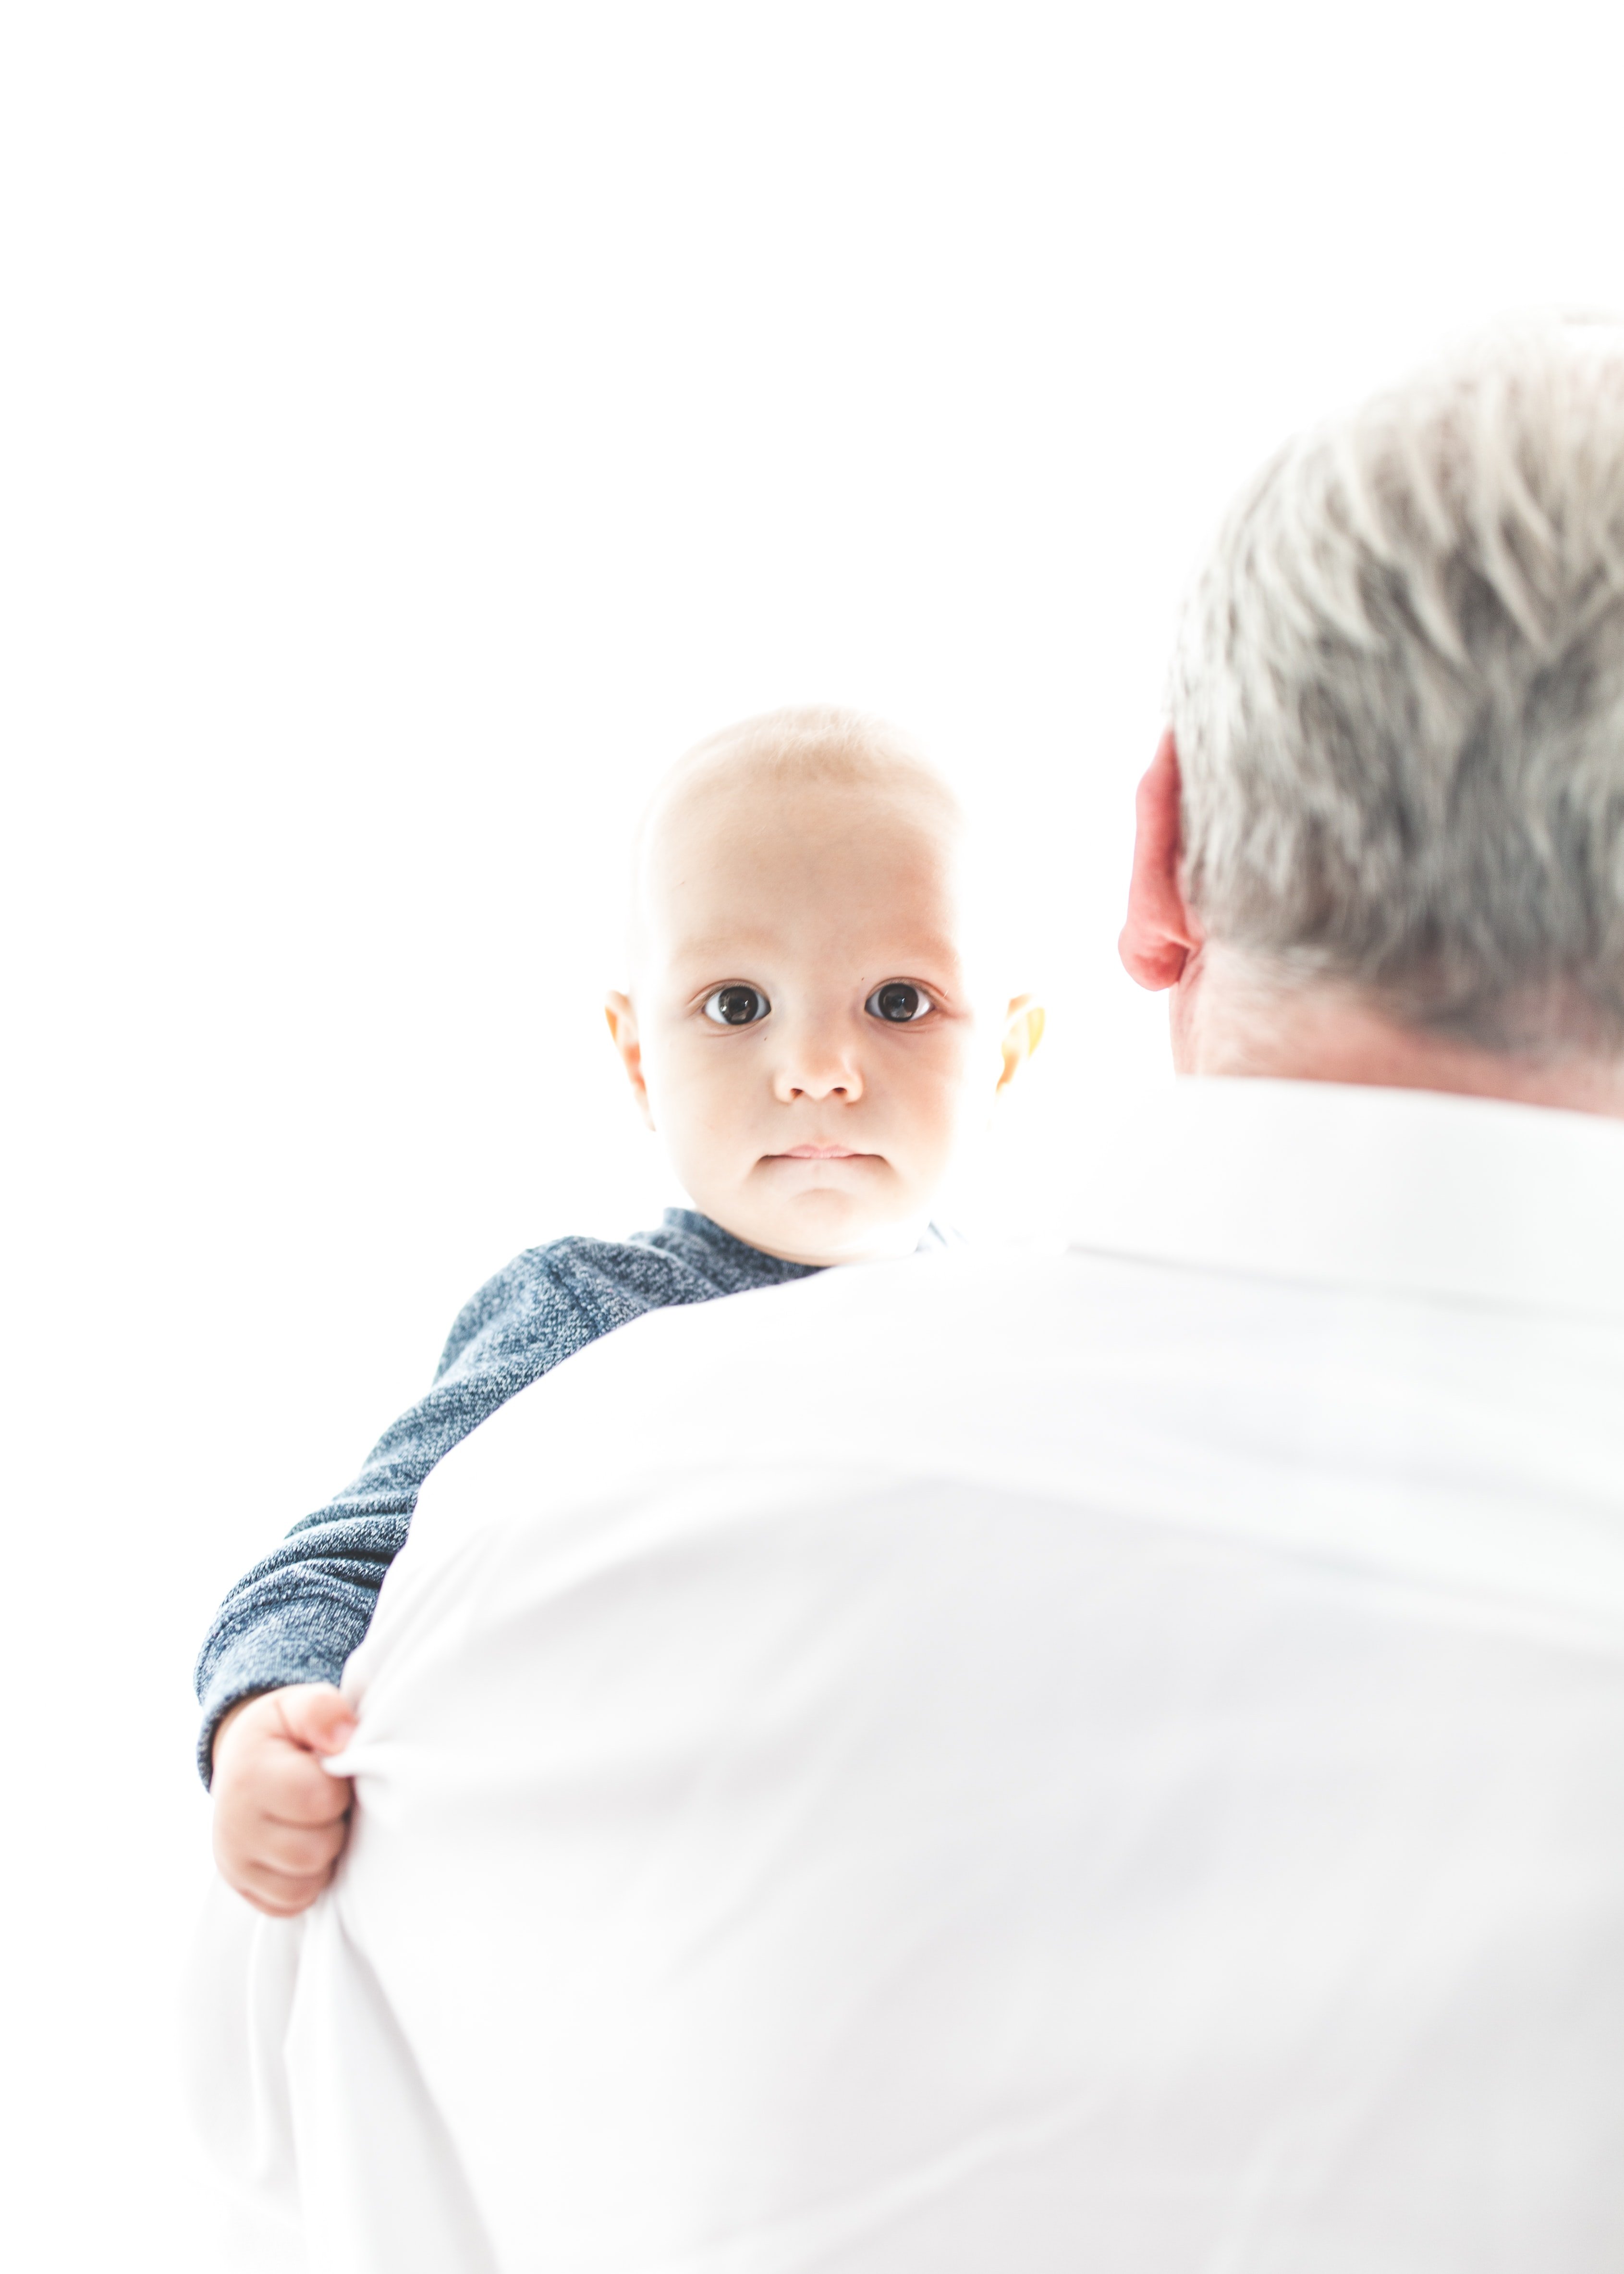 My dad would soon become a grandfather. | Source: Unsplash